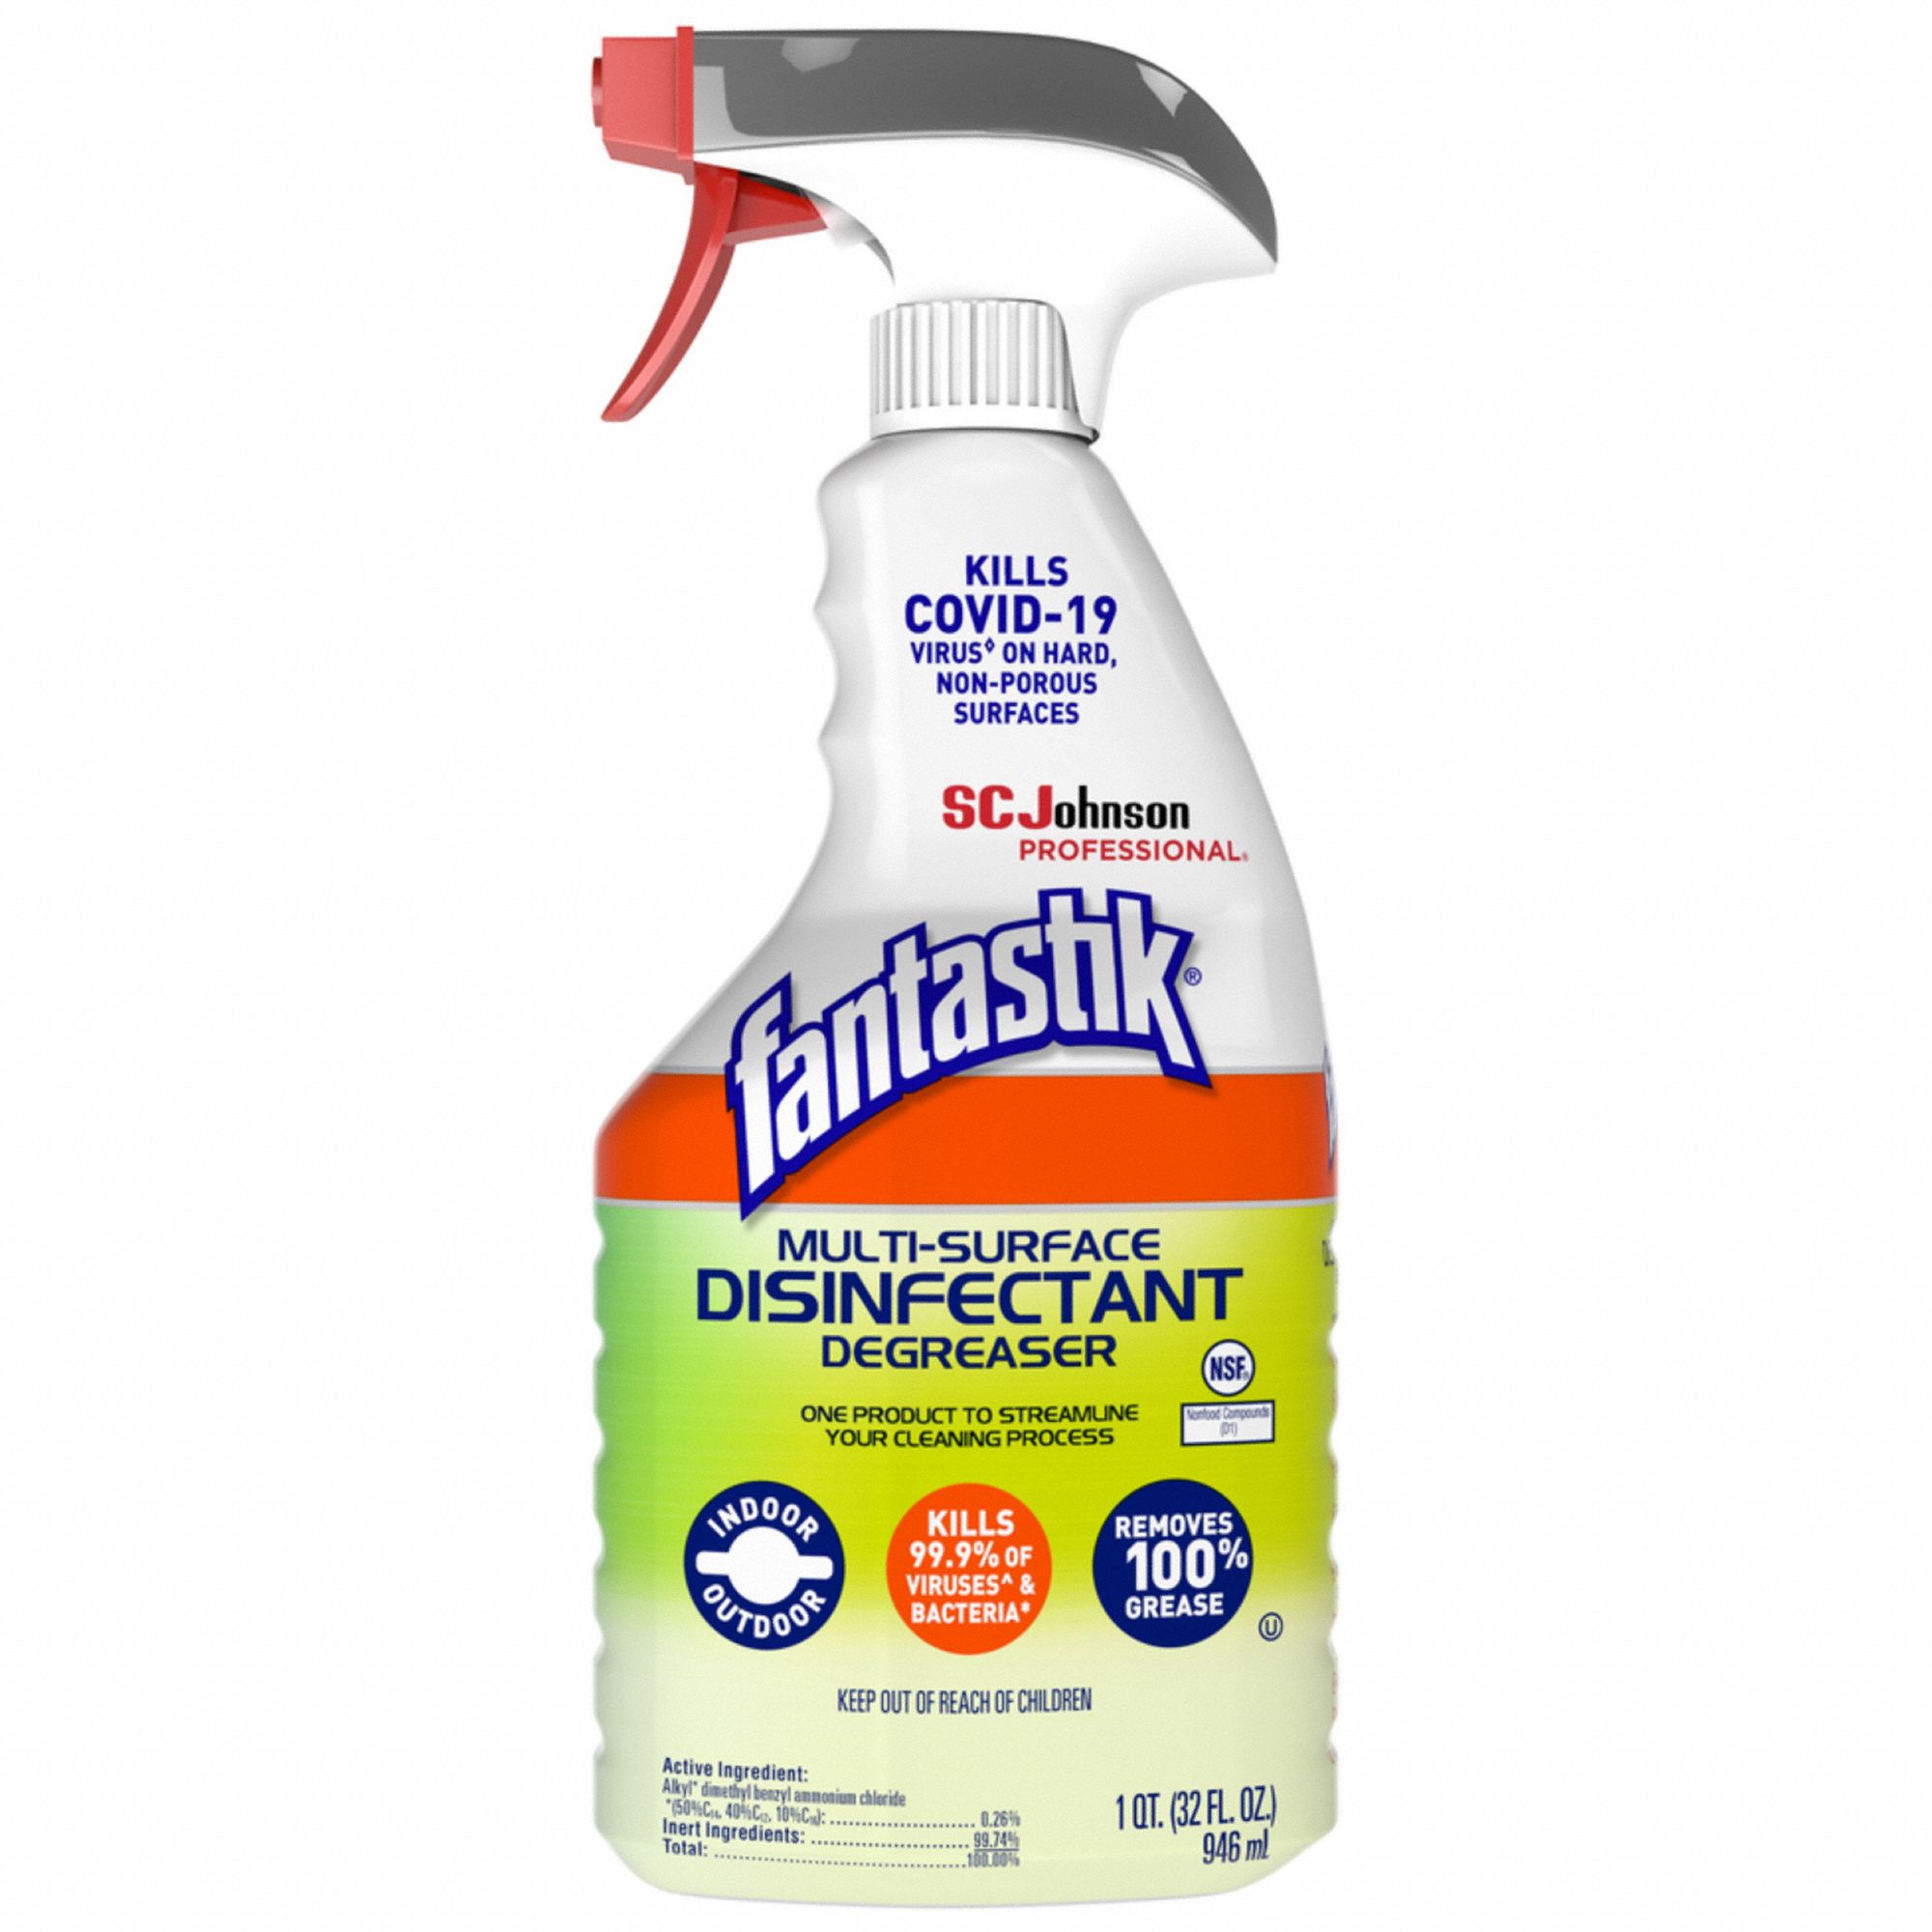 Fantastik All Purpose Cleaner with Bleach: Trigger Spray Bottle, 32 oz Container size, 8 Pk